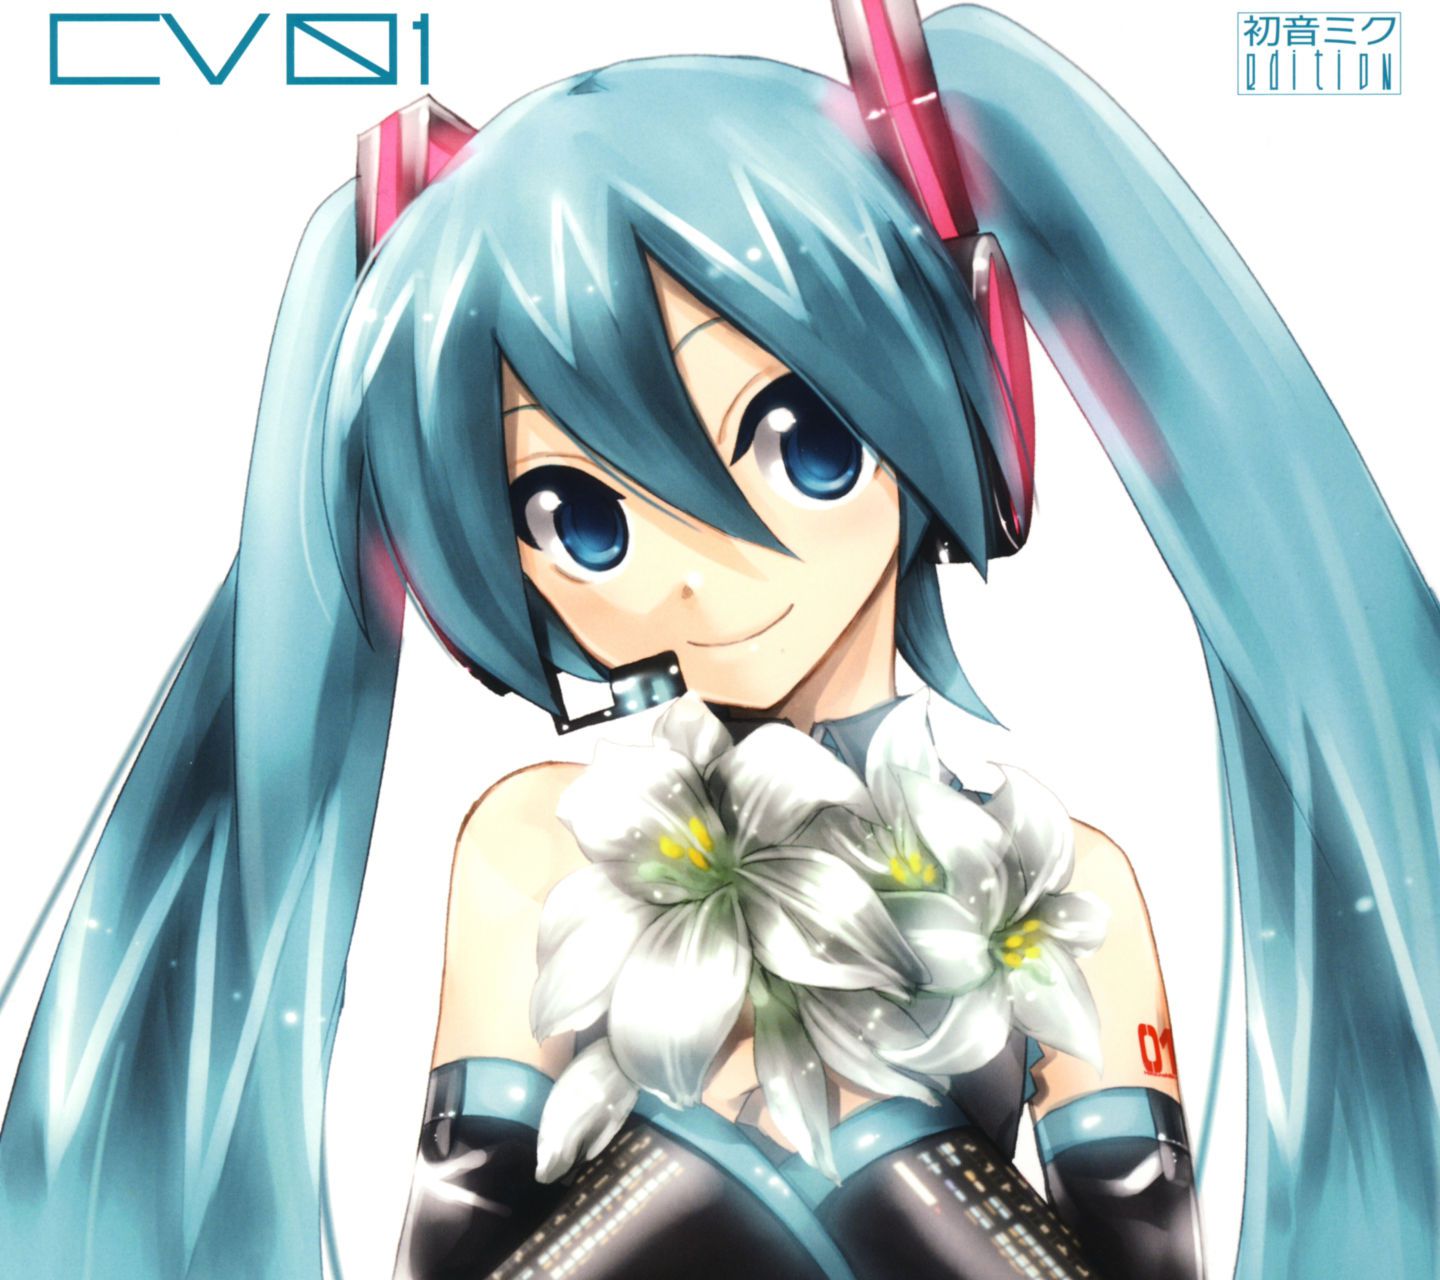 Vocaloid Android壁紙 1 初音ミク アニメ壁紙ネット Pc Android Iphone壁紙 画像